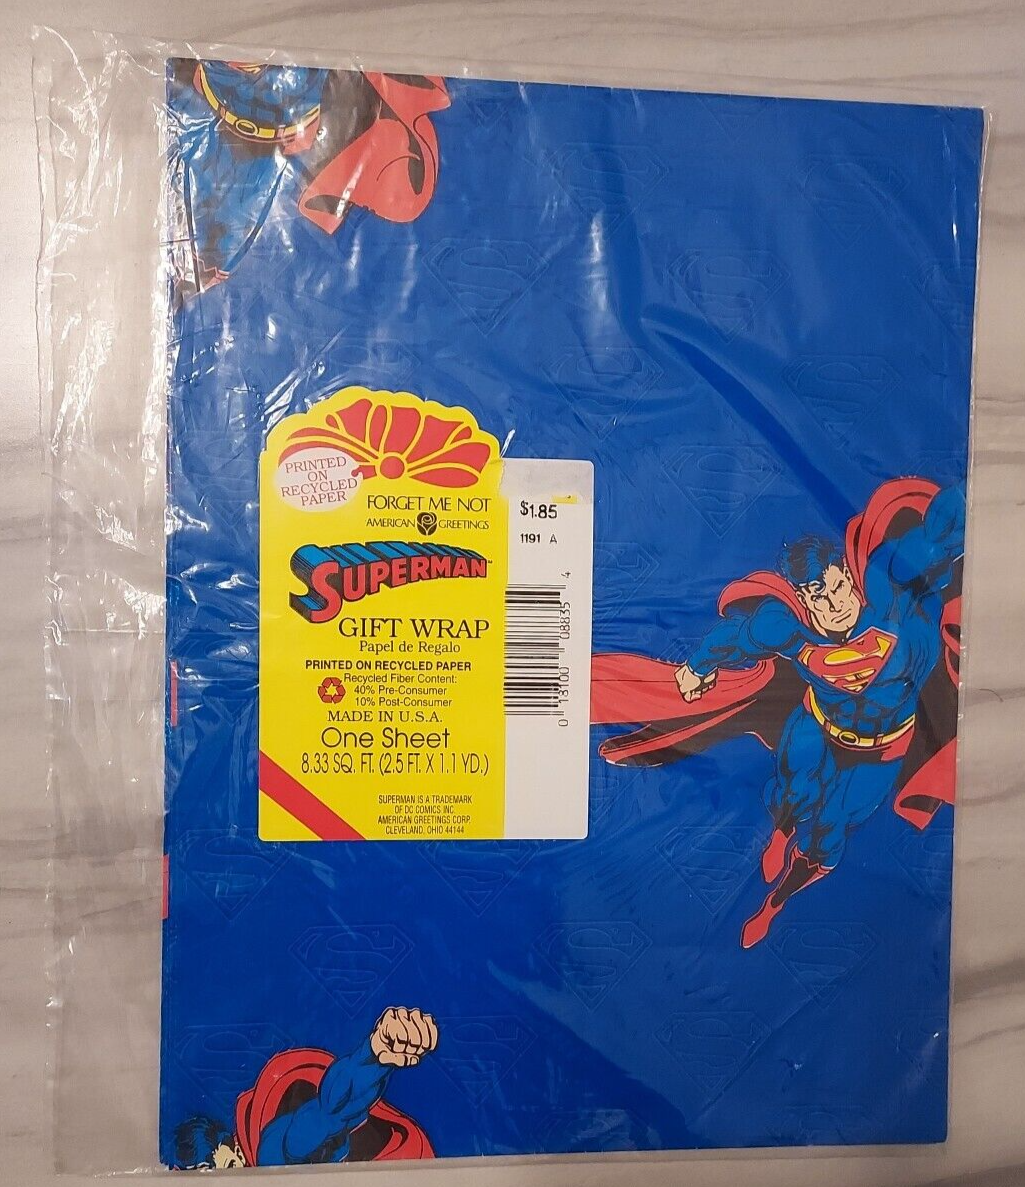 NOS American Greetings Vintage Superman Gift Wrap Blue Wrapping Paper DC Comics - $9.89